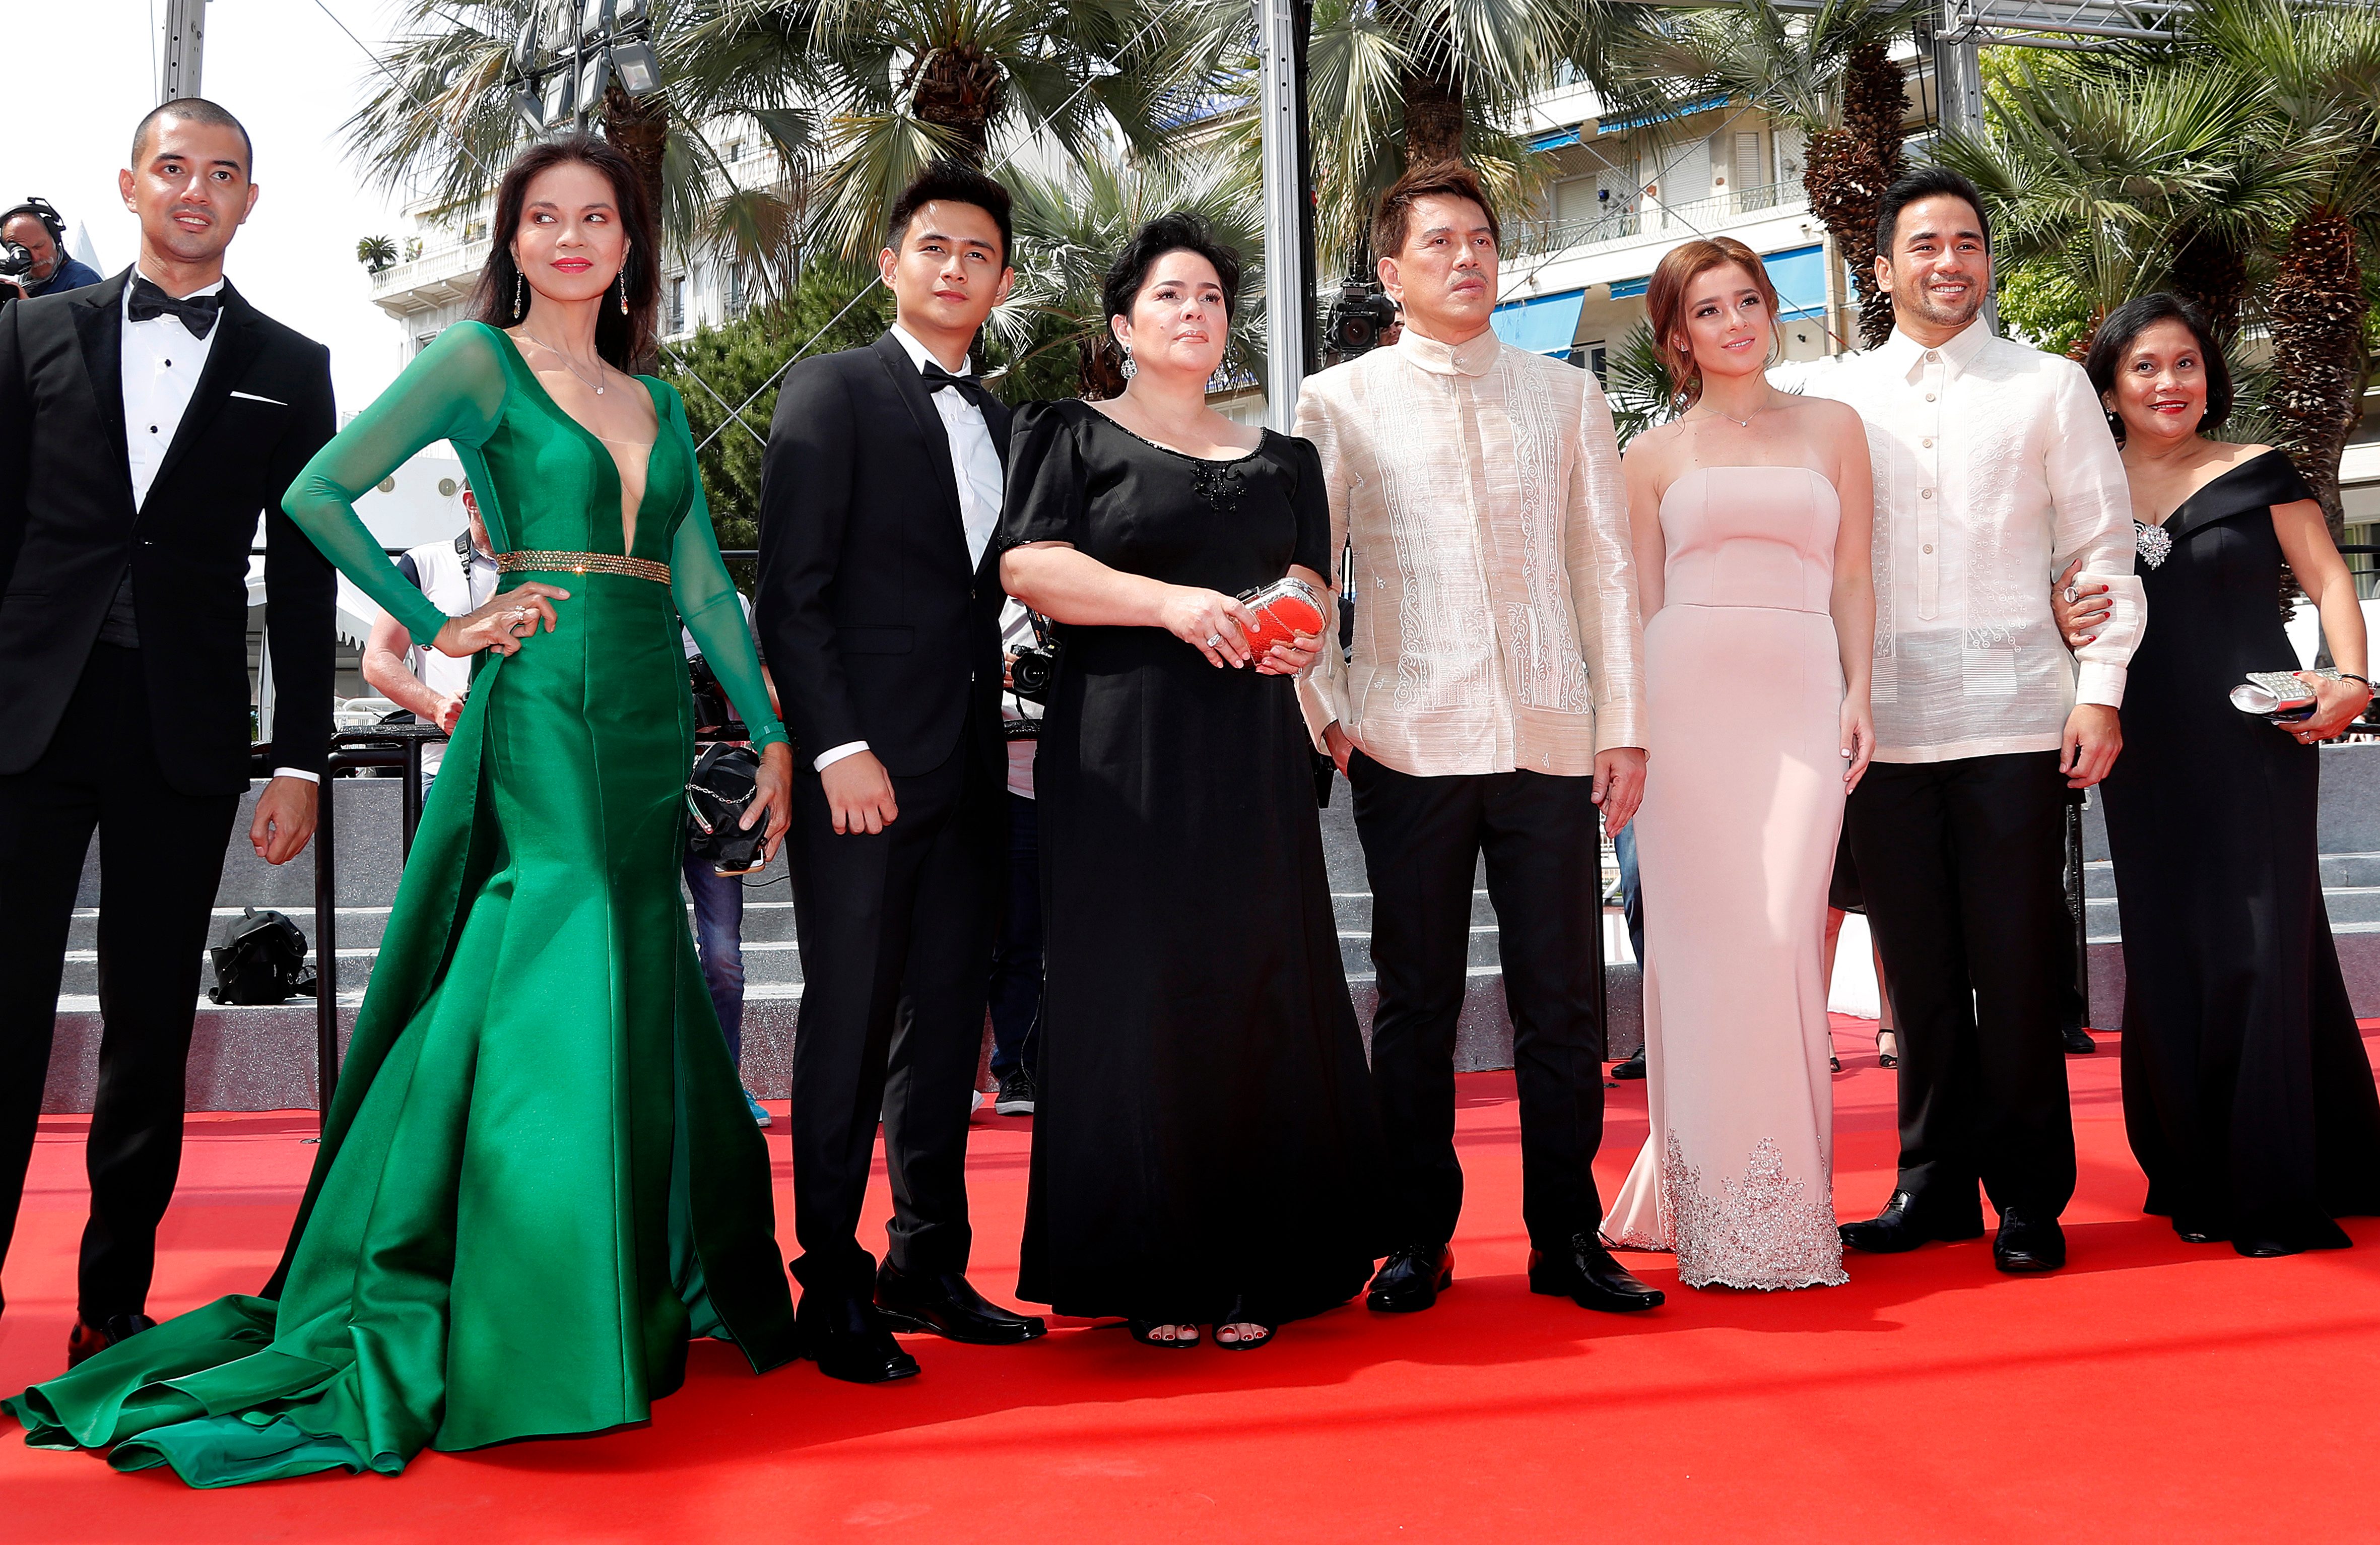 (L-R) Screenwriter Troy Espiritu, actress Maria Isabel Lopez, actor Jomari Angeles, actress Jaclyn Jose, director Brillante Mendoza, actress Andi Eigenmann, actor Neil Ryan P.Sese and actress Ruby Ruiz arrive for the screening of 'Ma'Rosa' during the 69th annual Cannes Film Festival. Photo by Sebastien Nogier/EPA 